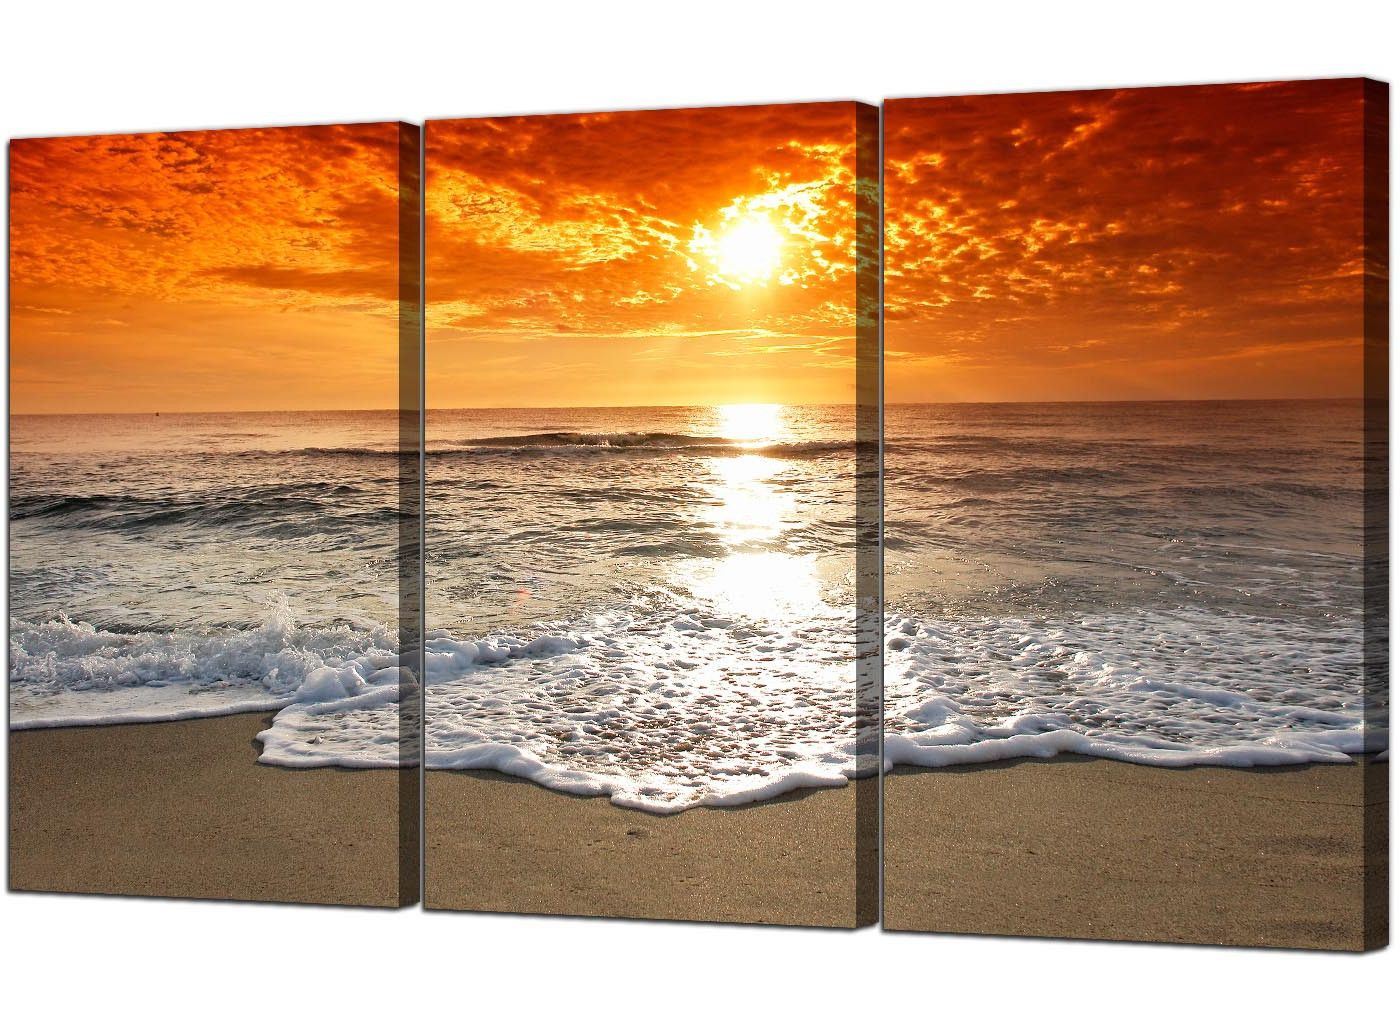 Sunset Wall Art Regarding Widely Used Cheap Beach Sunset Canvas Prints Uk Set Of 3 For Your (View 15 of 20)